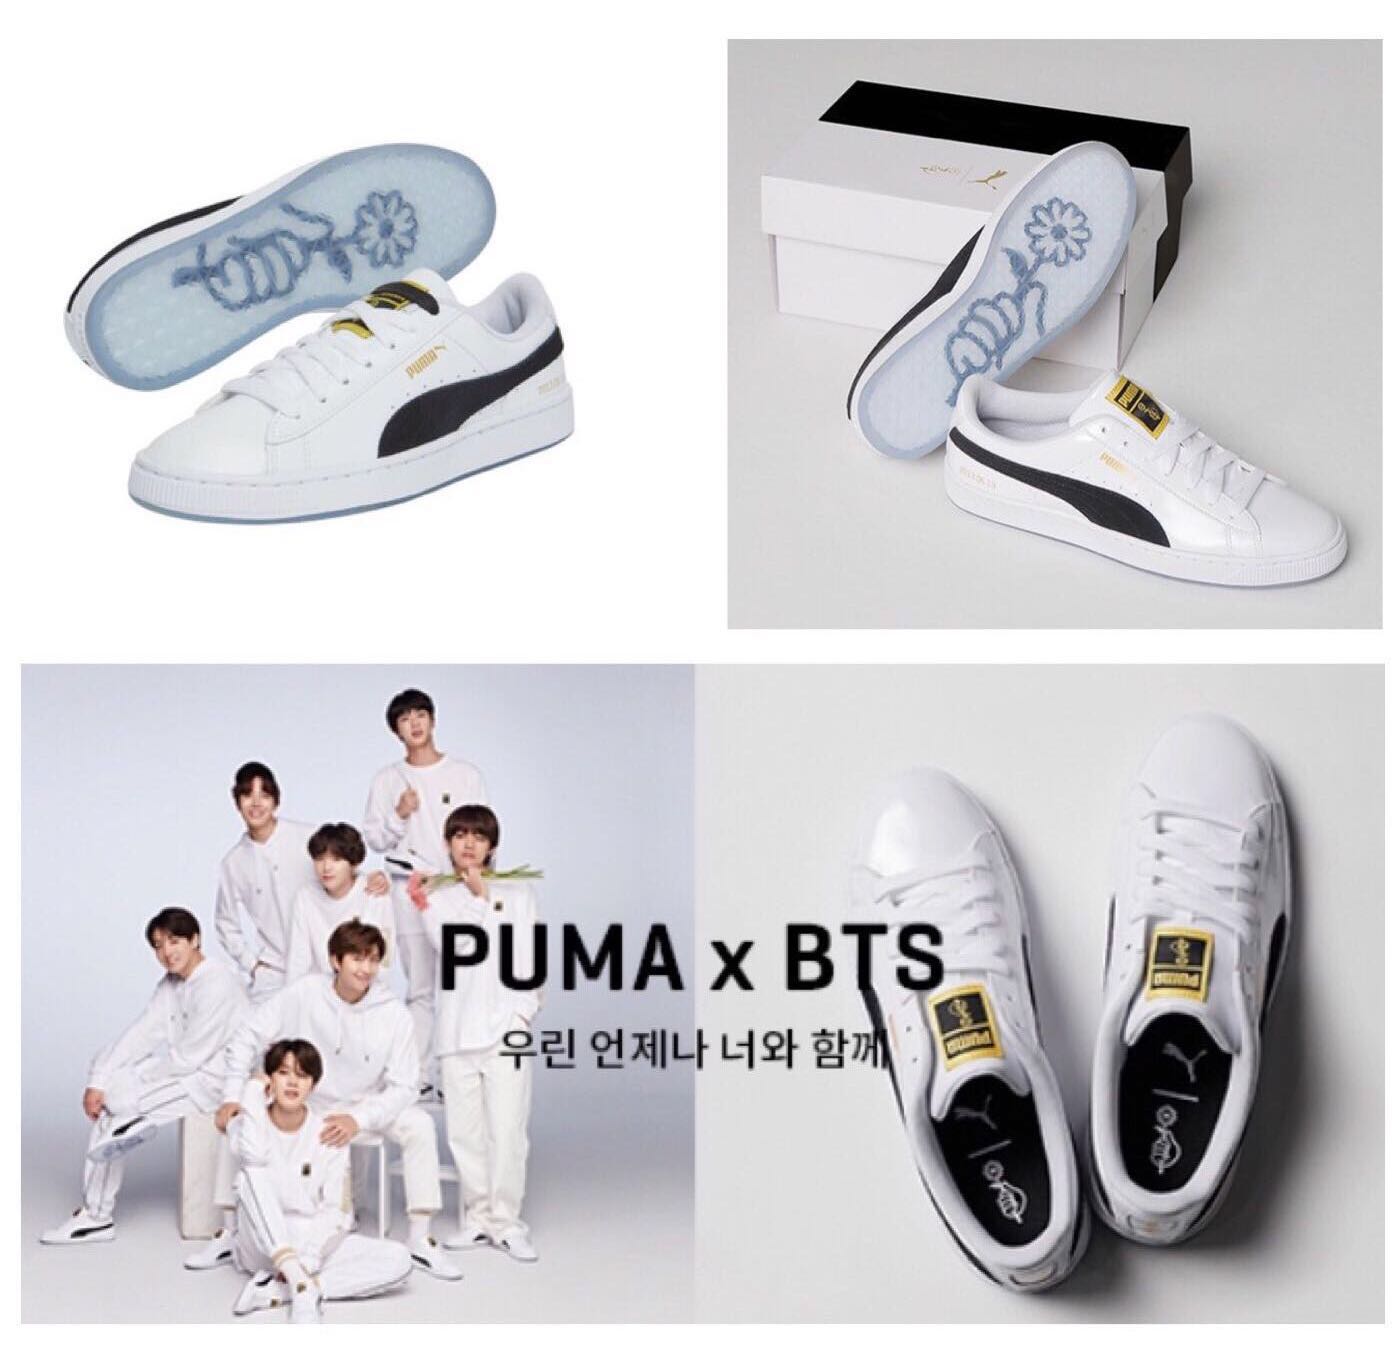 where are puma products made